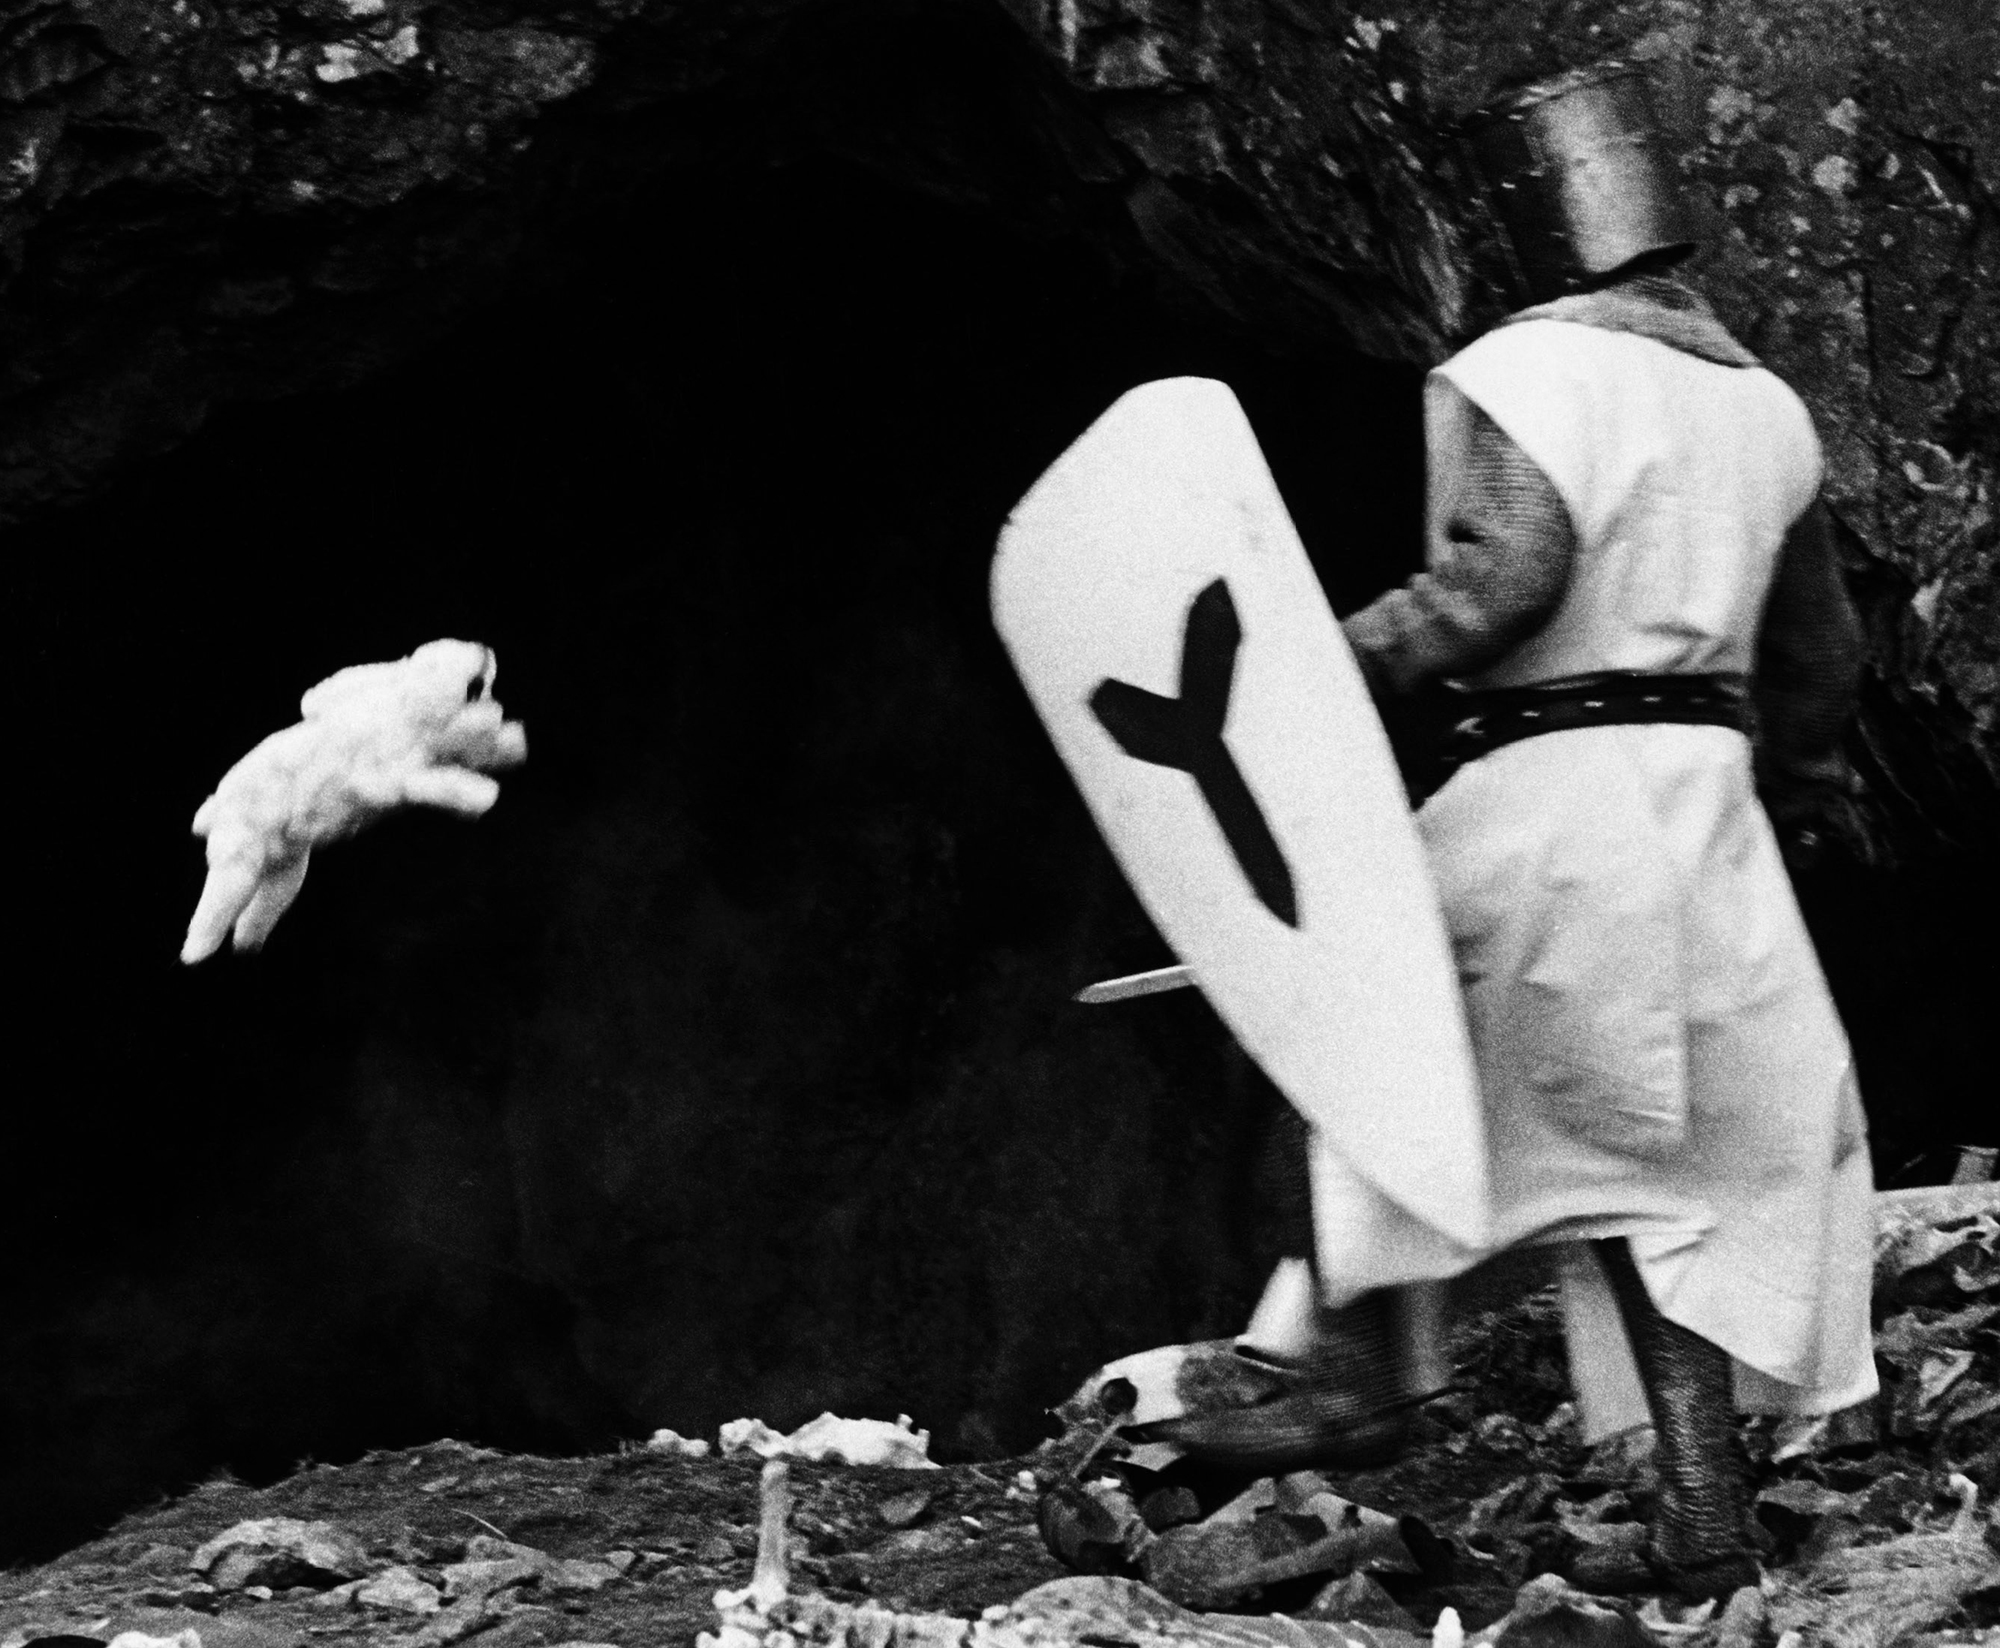 The Killer Rabbit of Caerbannog in Monty Python and the Holy Grail.